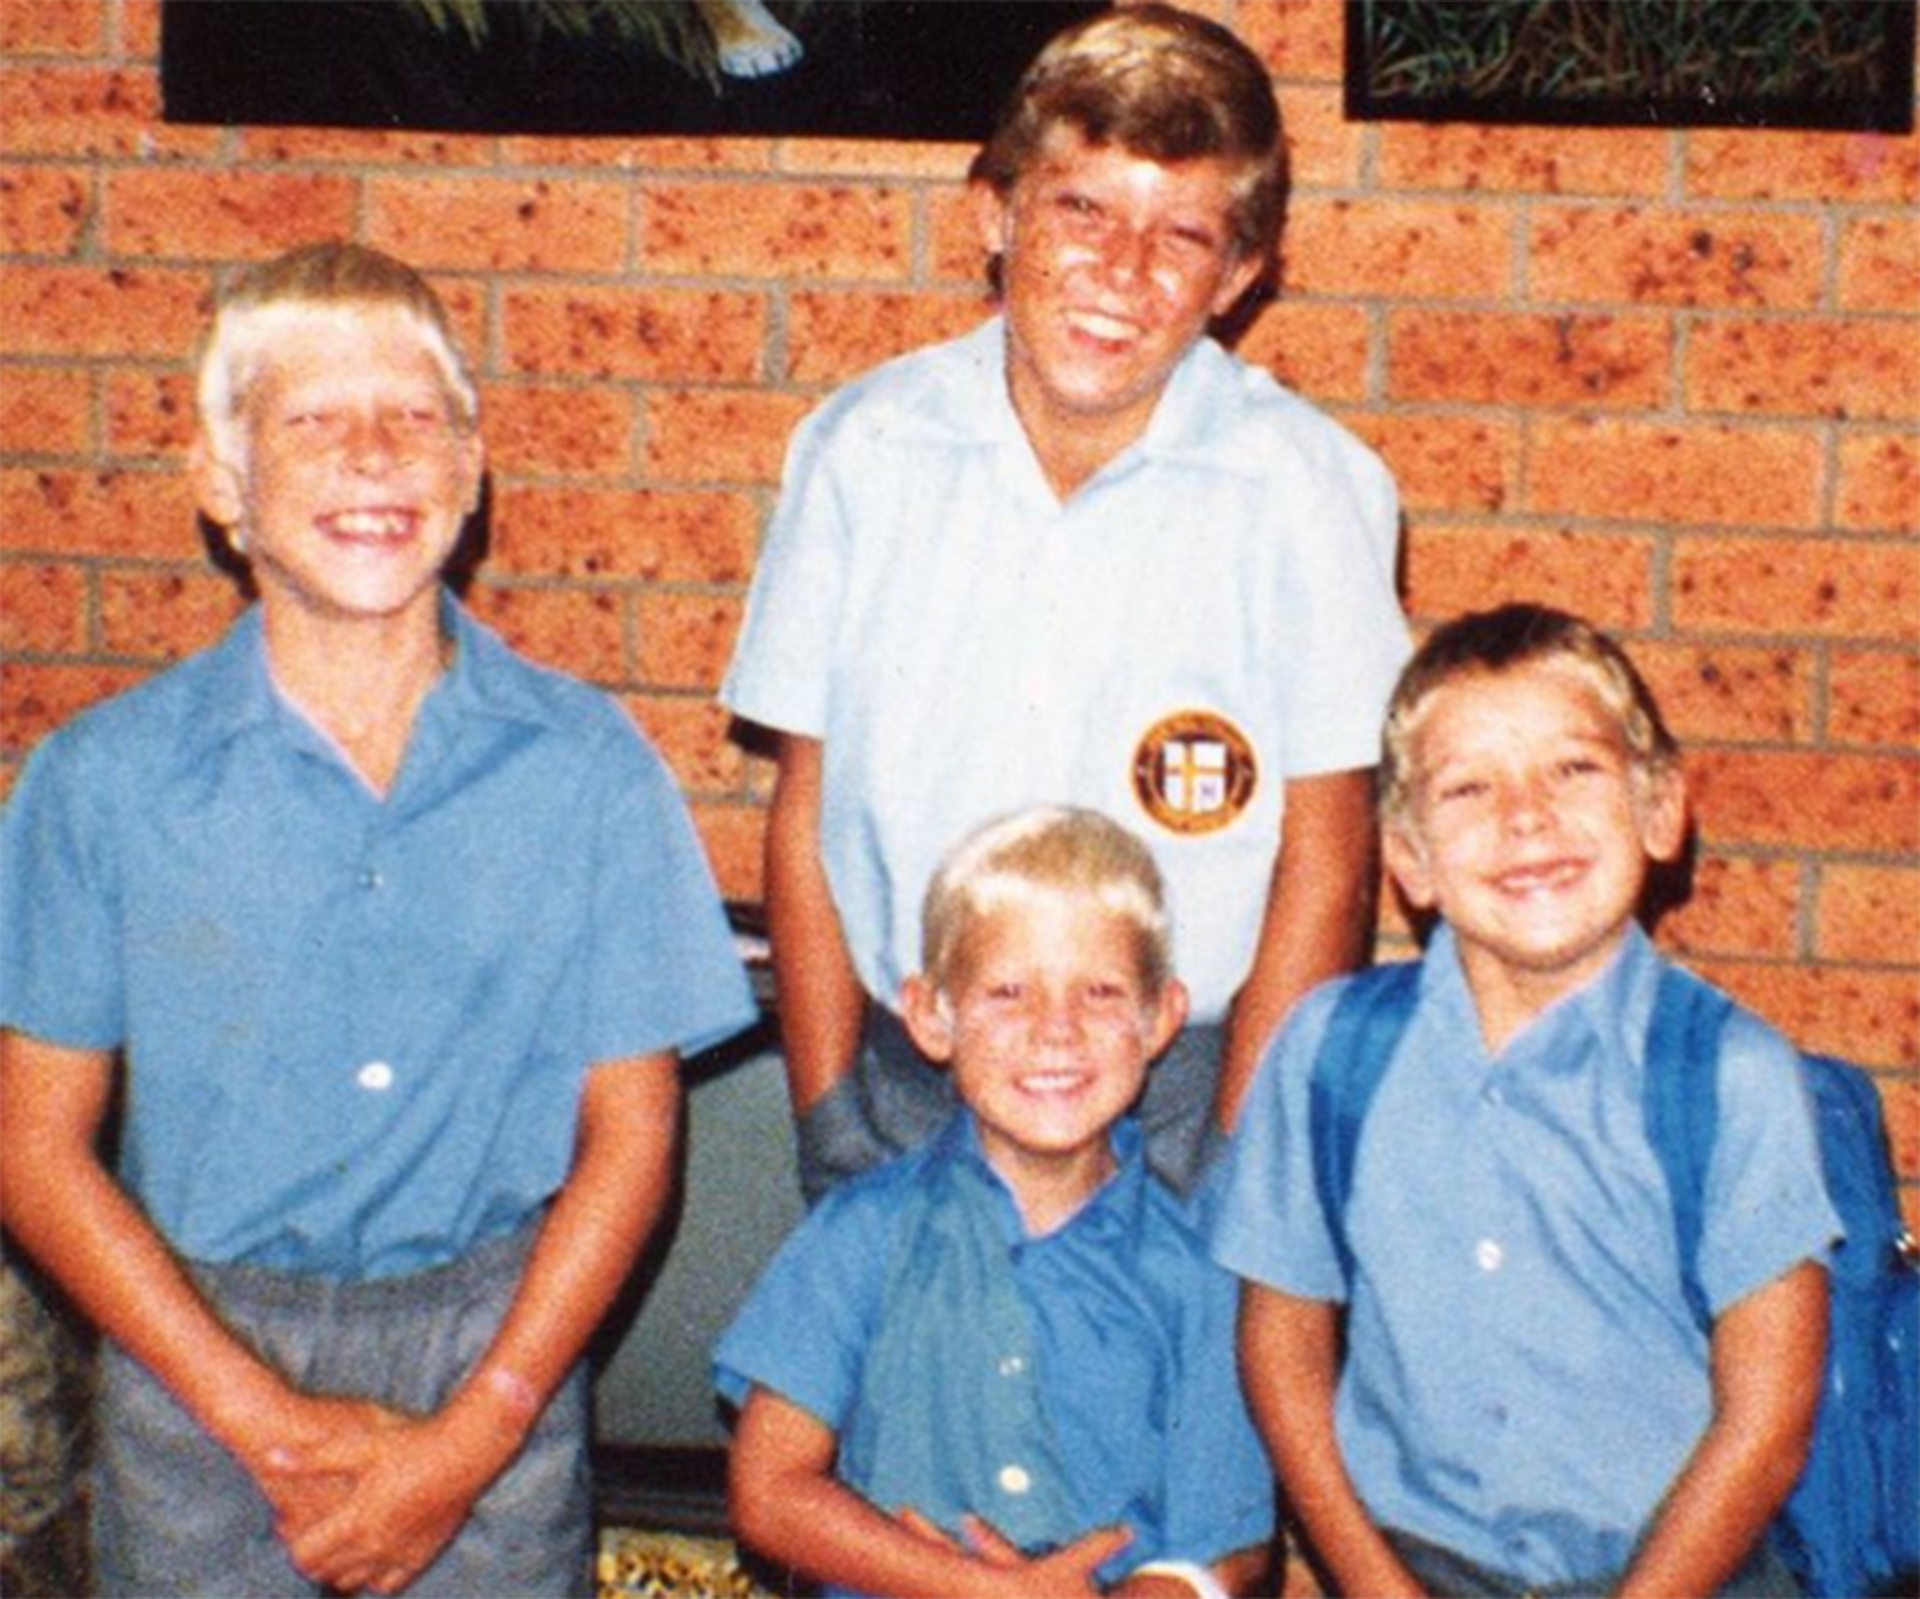 Mick Fanning pays tribute to late brother with touching Instagram post